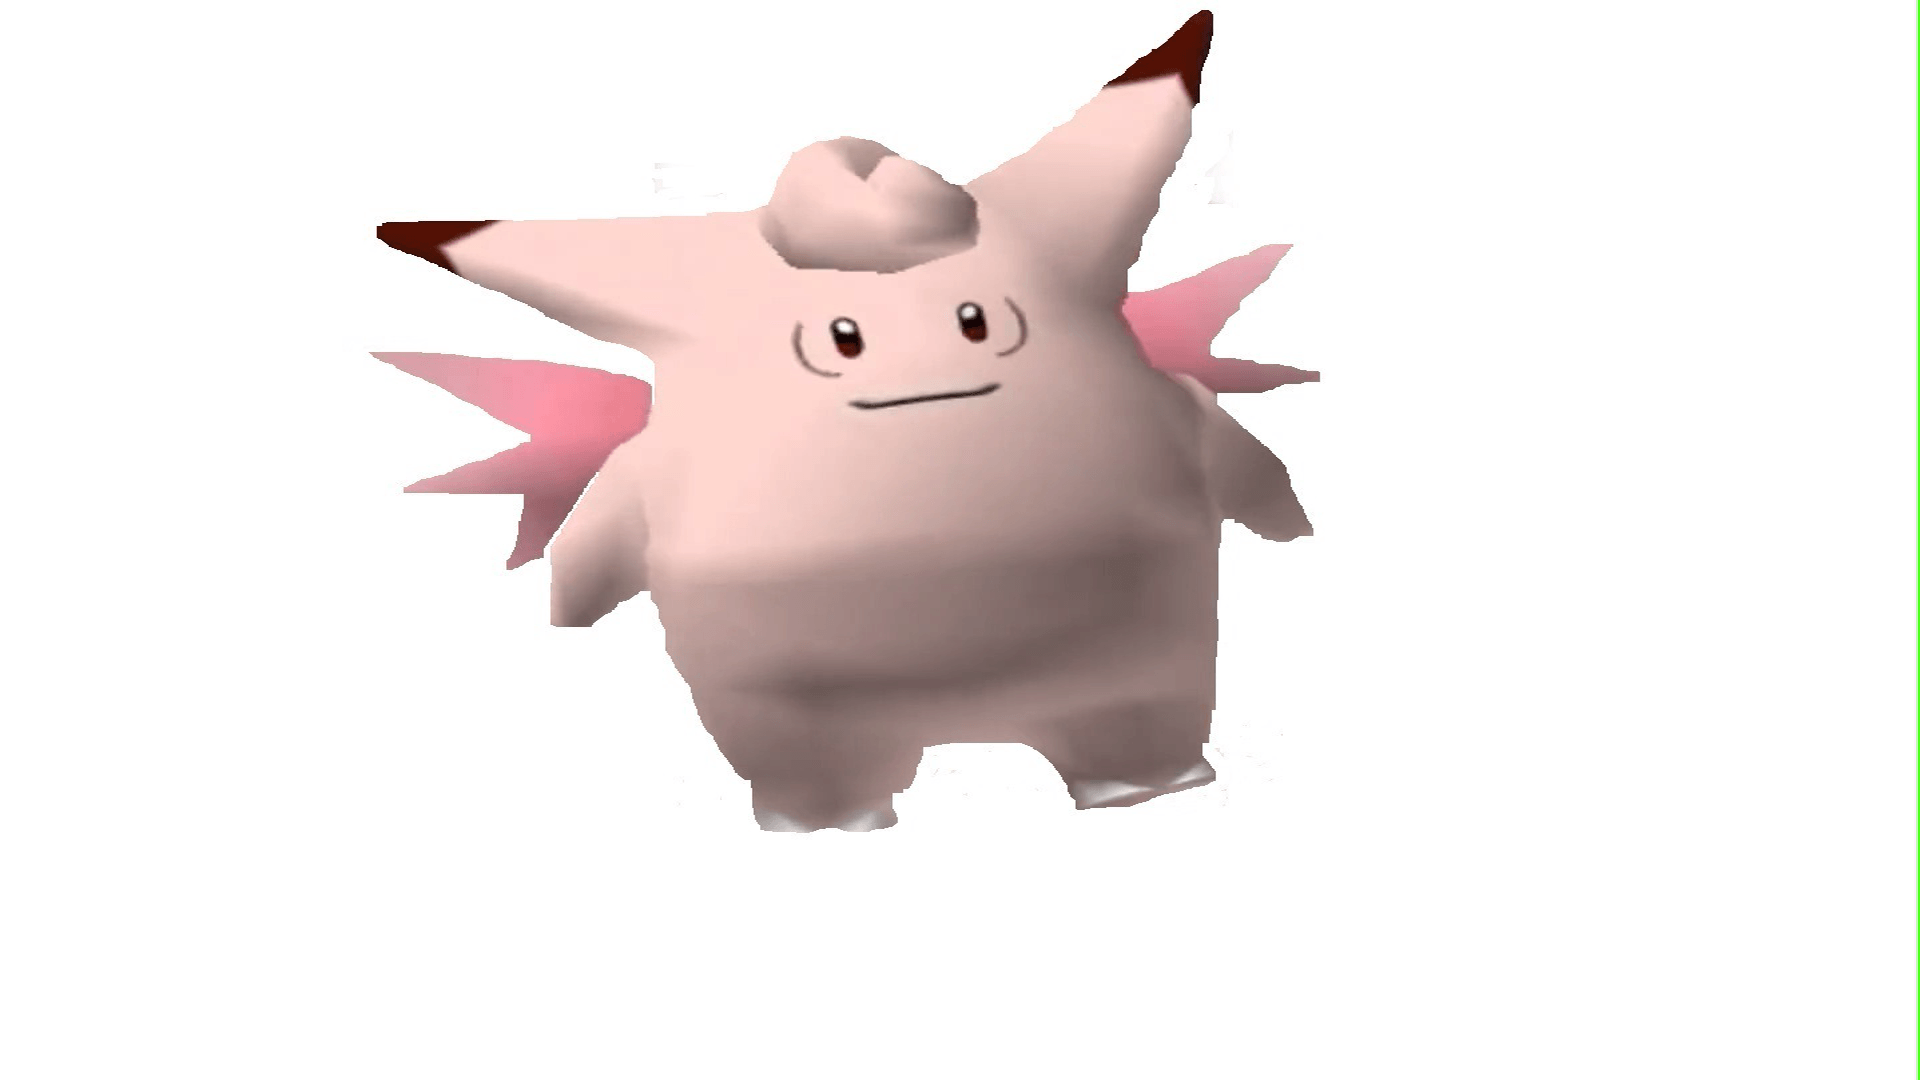 Clefable cover her ears, about the ultra sonic waves